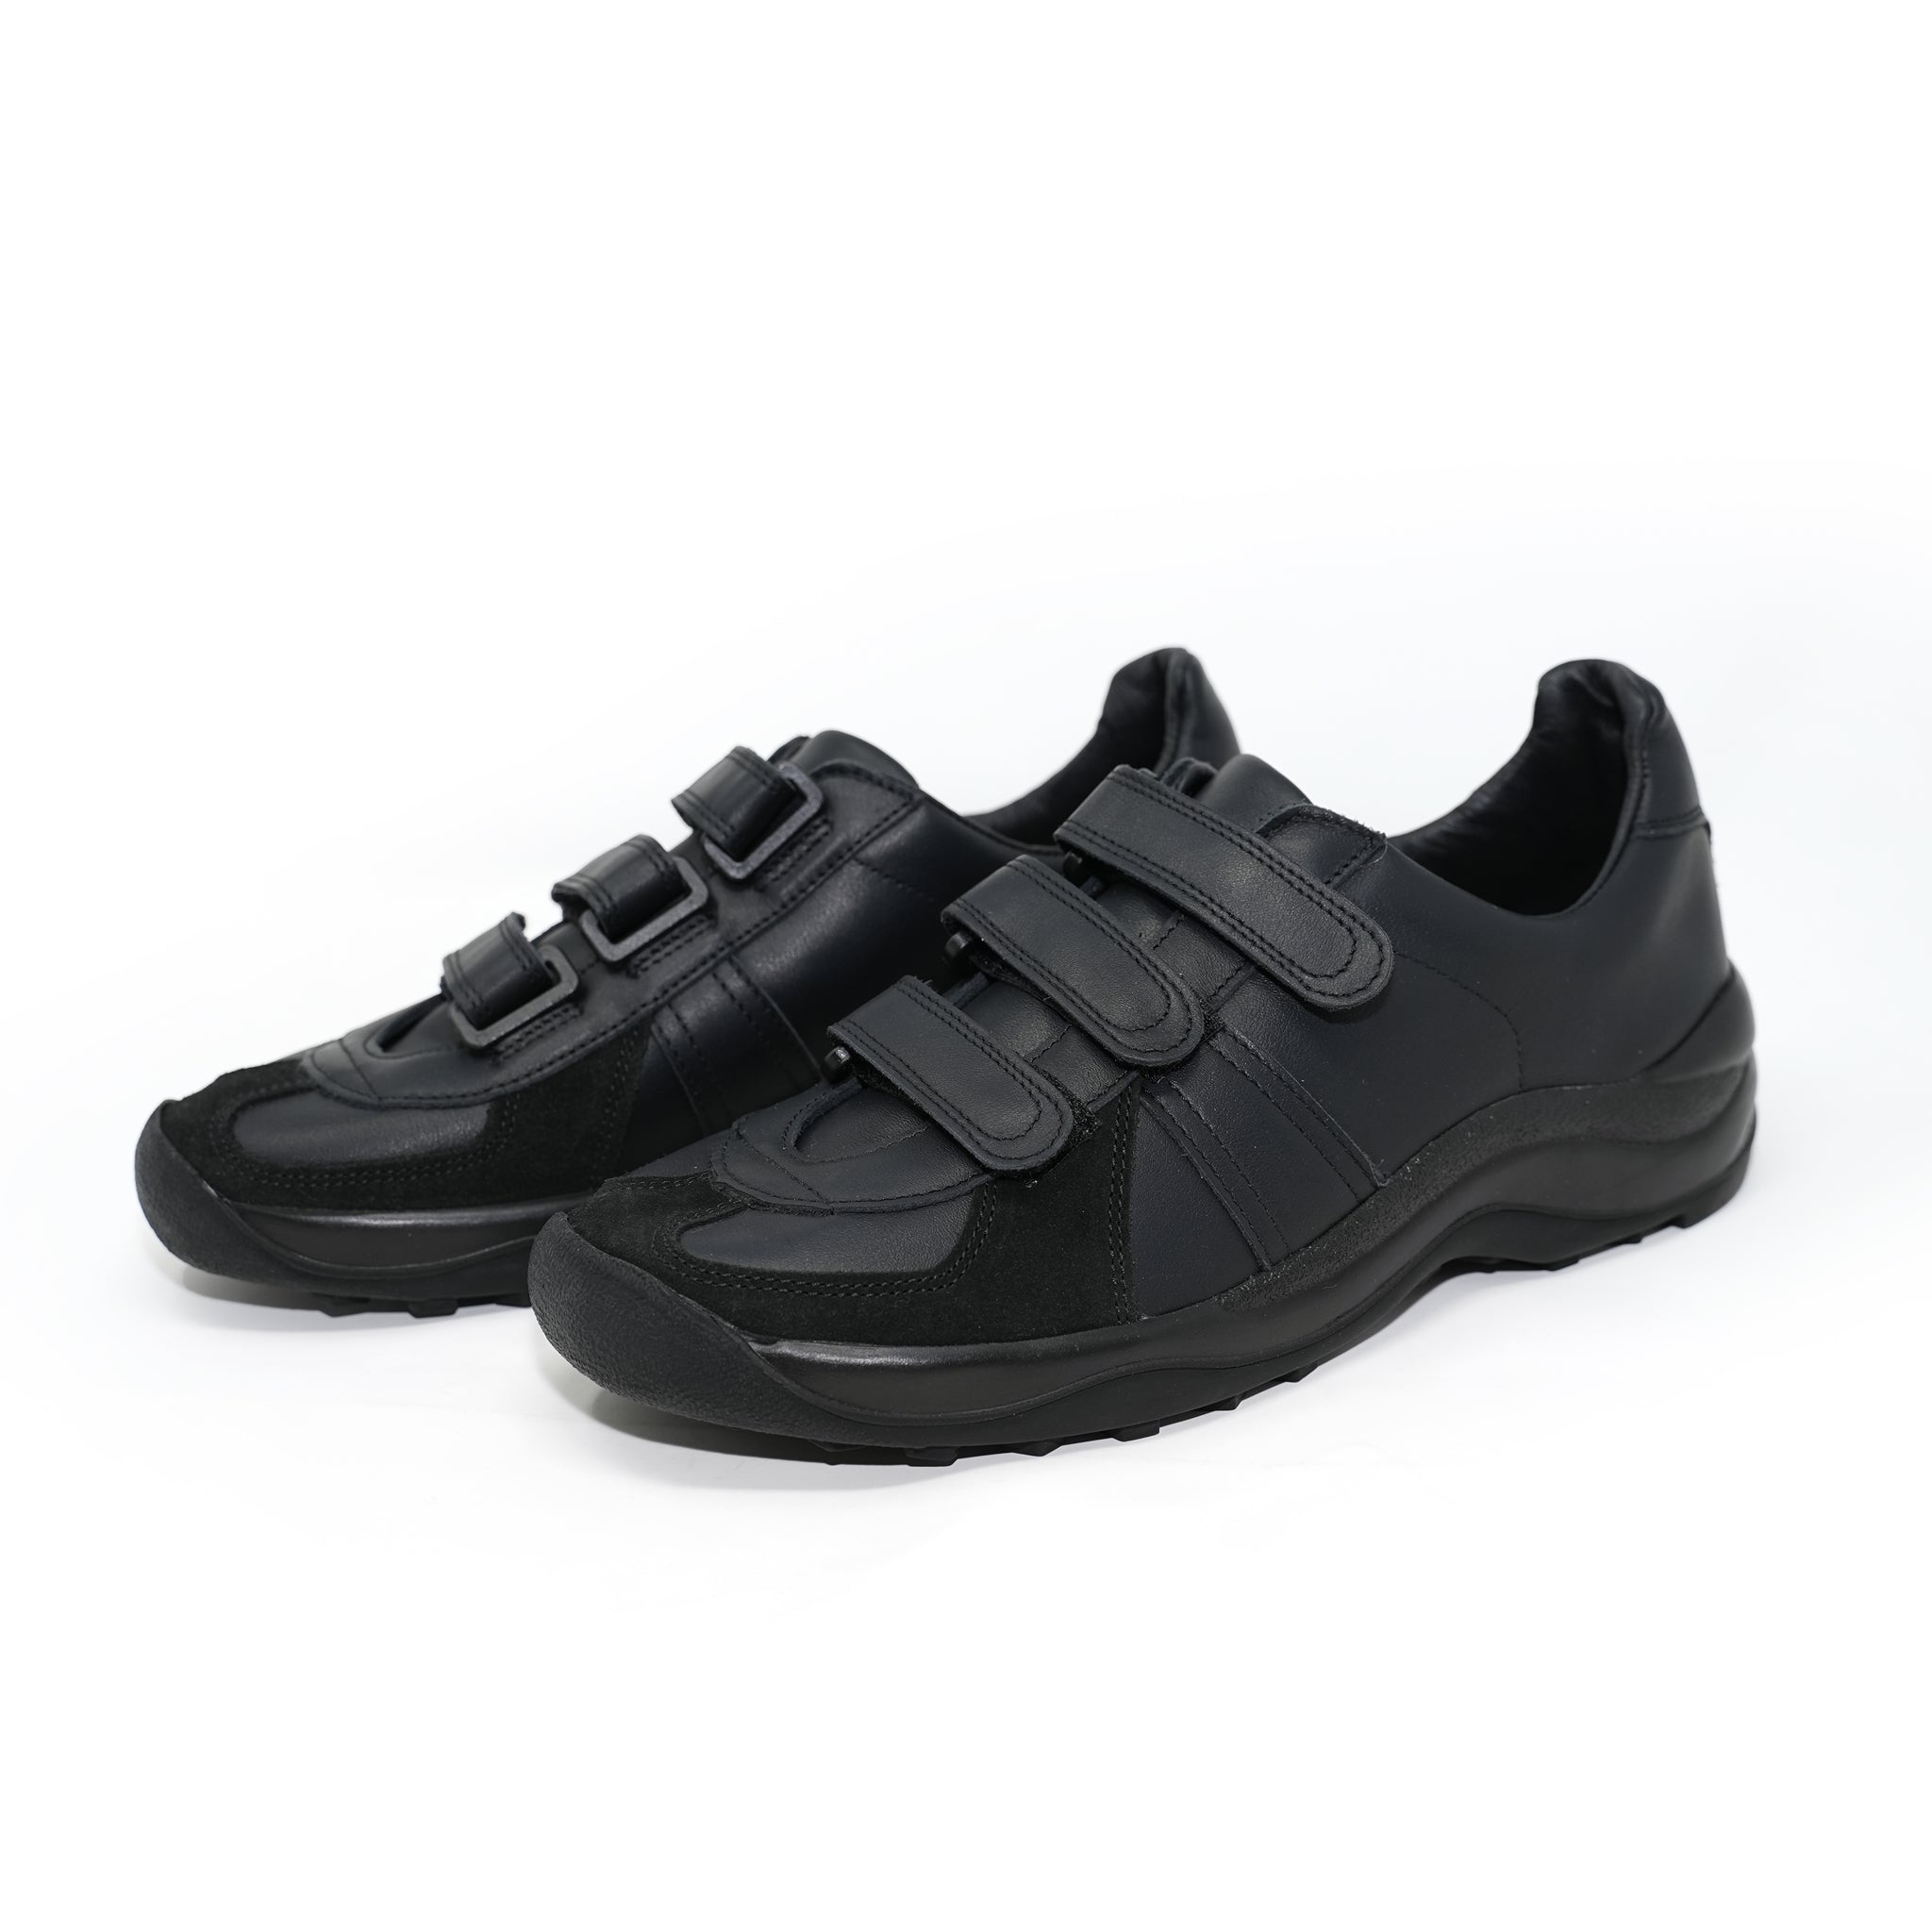 No:1786SL | Name:GERMAN MILITARY TRAINER | Color:Black【REPRODUCTION OF FOUND_リプロダクションオブファウンド】